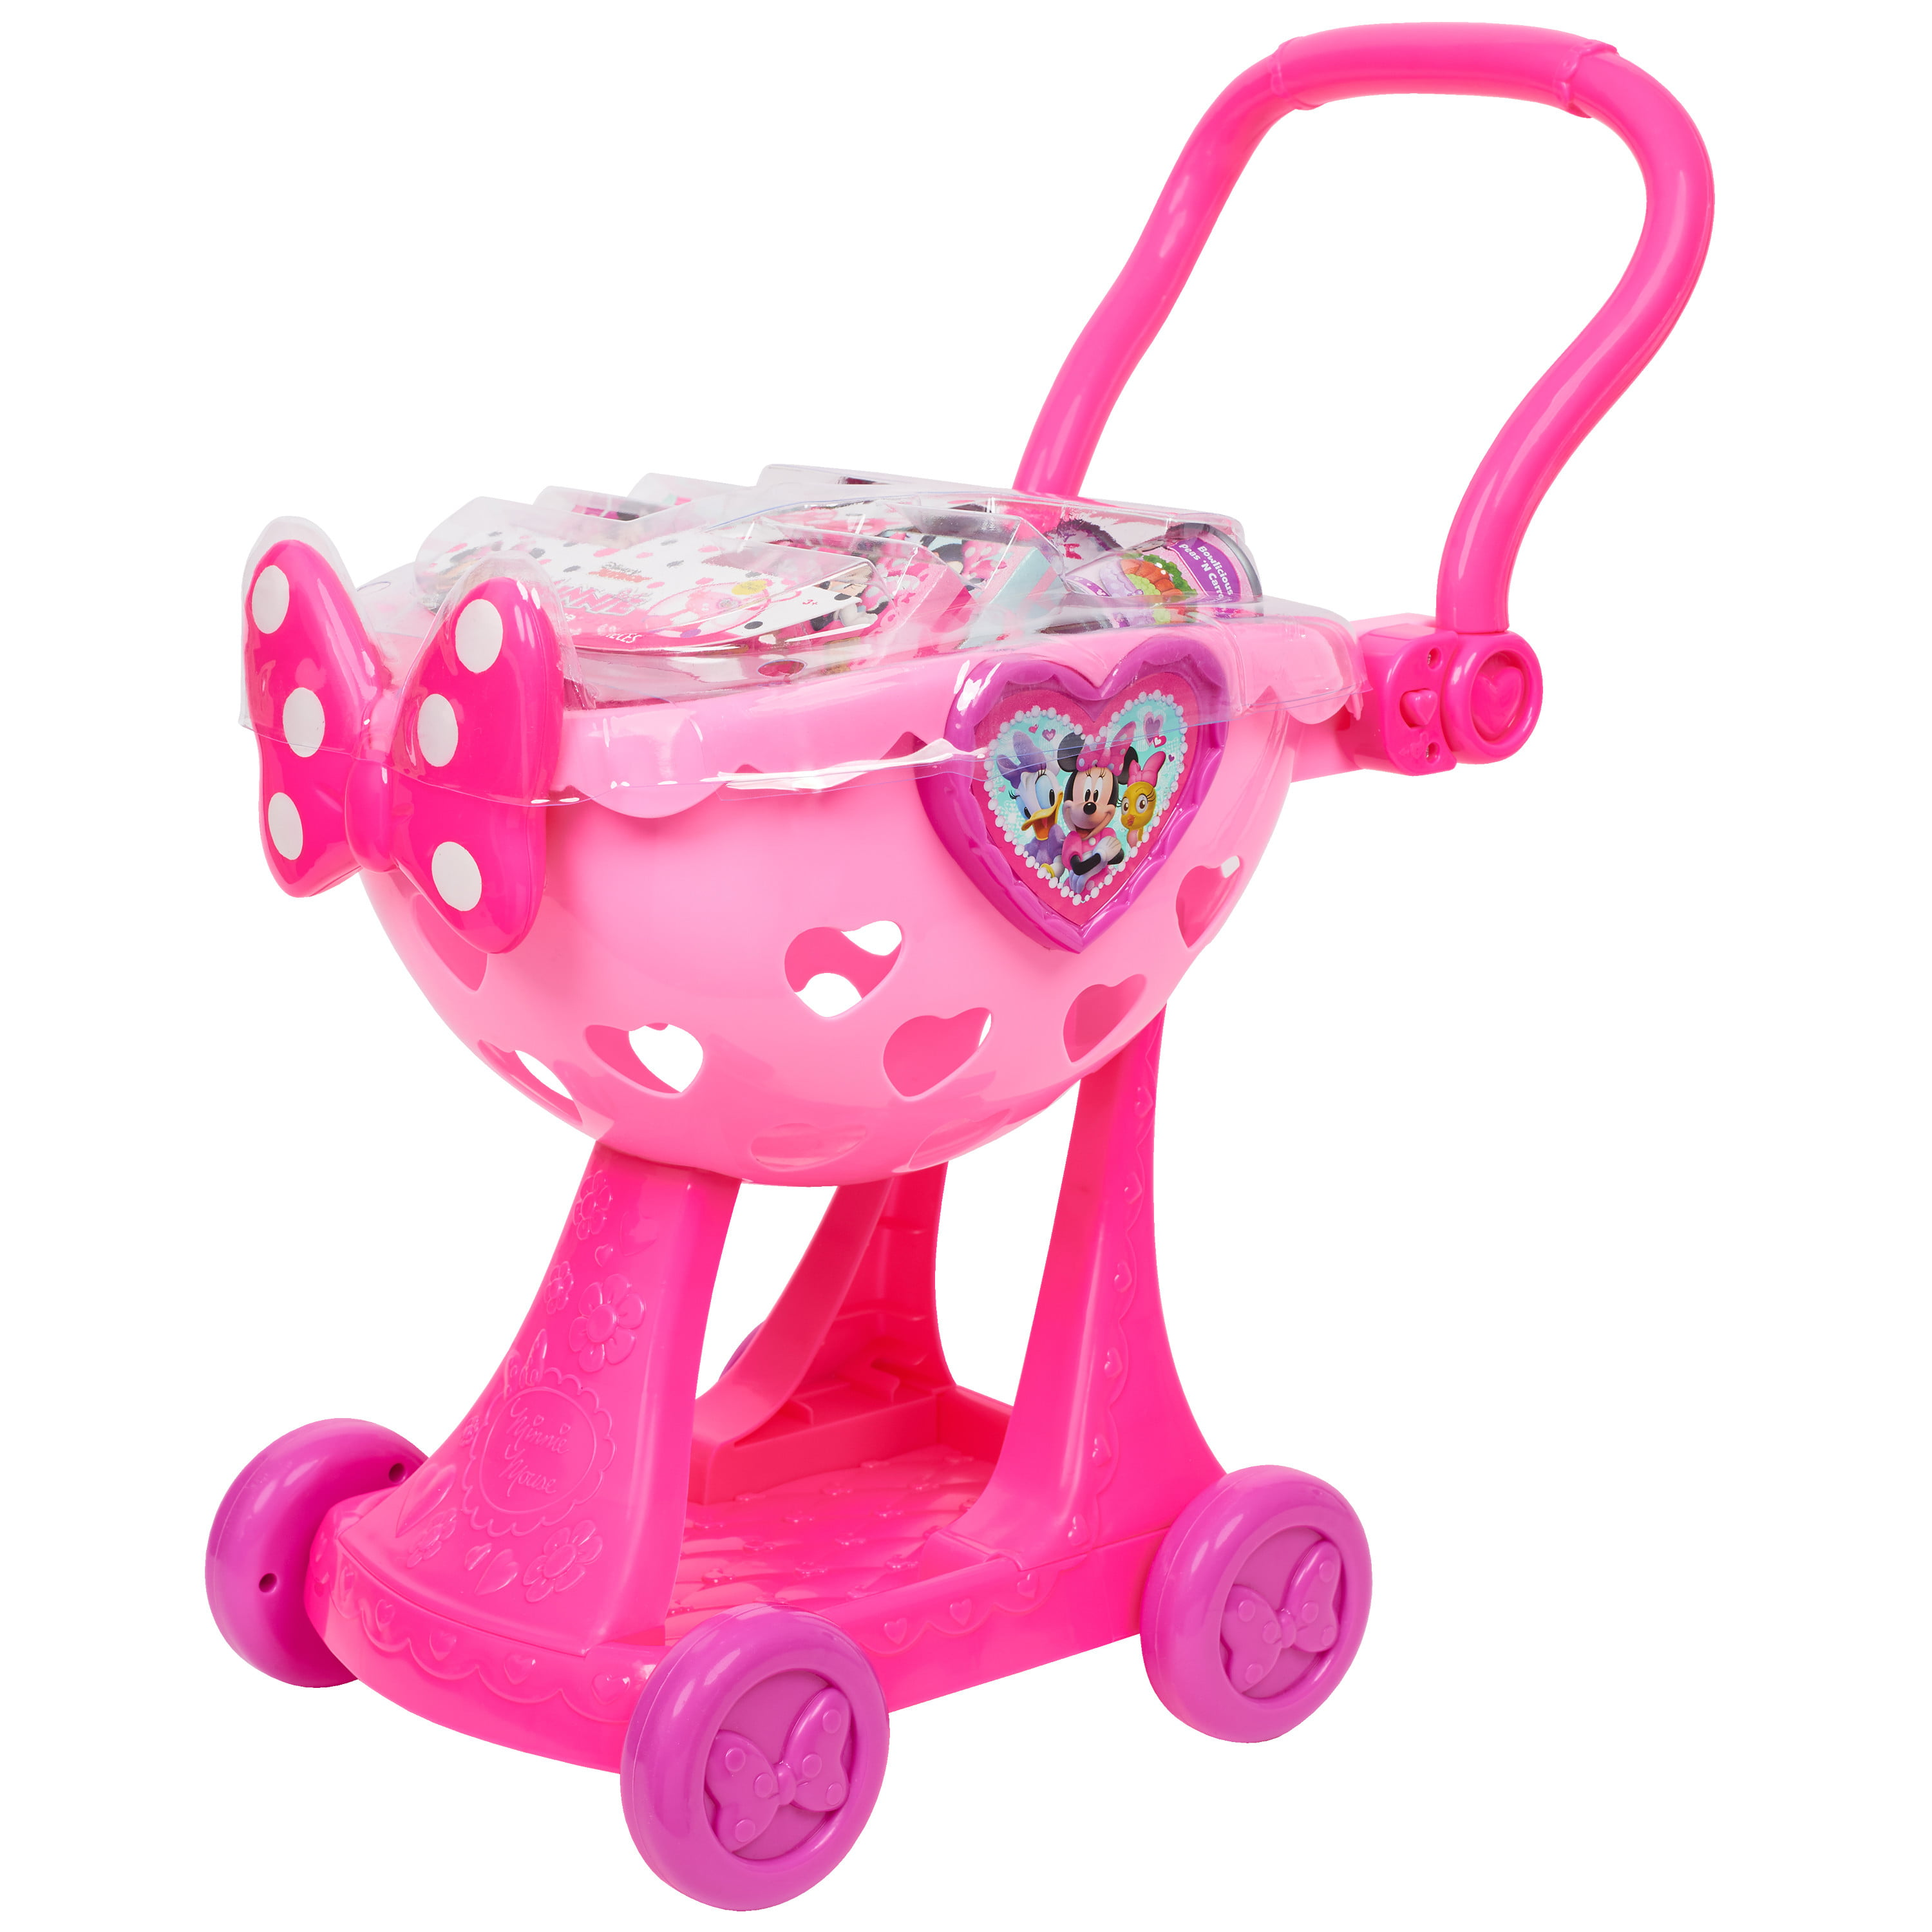 Minnie's Happy Helpers Bowtique Shopping Cart, Kids Toys for Ages 3 up - Walmart.com